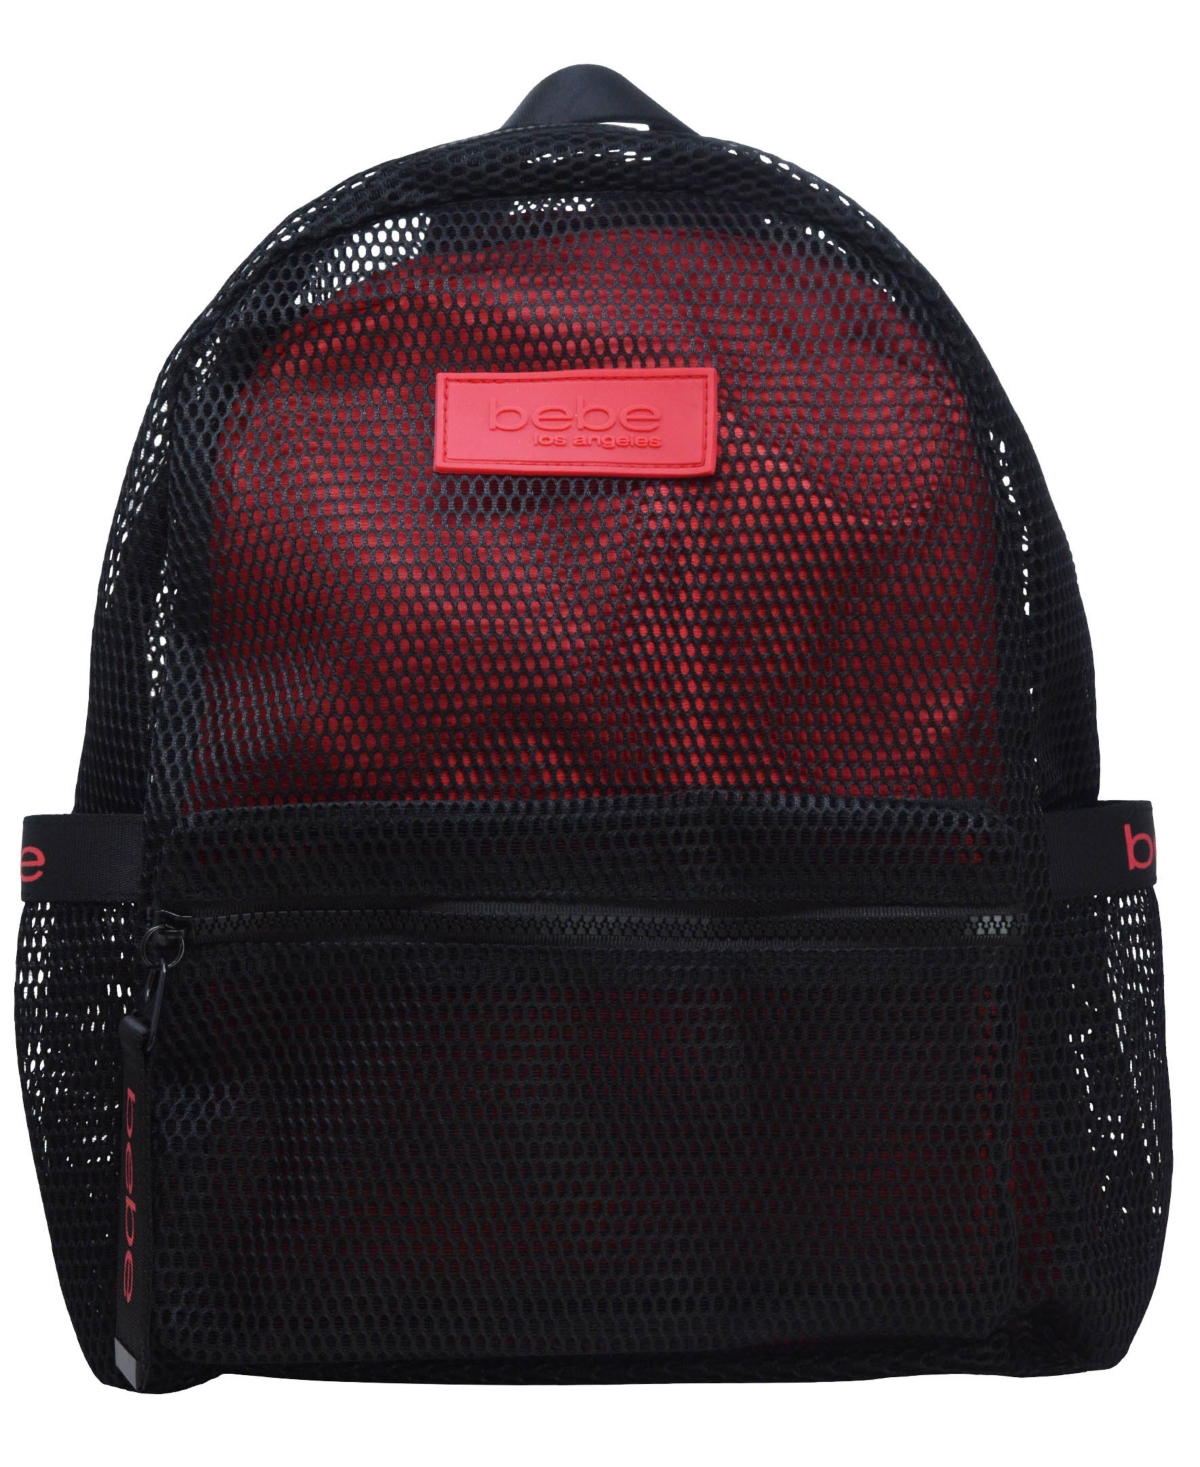 Bebe Manny Backpack With Mask In Black,red